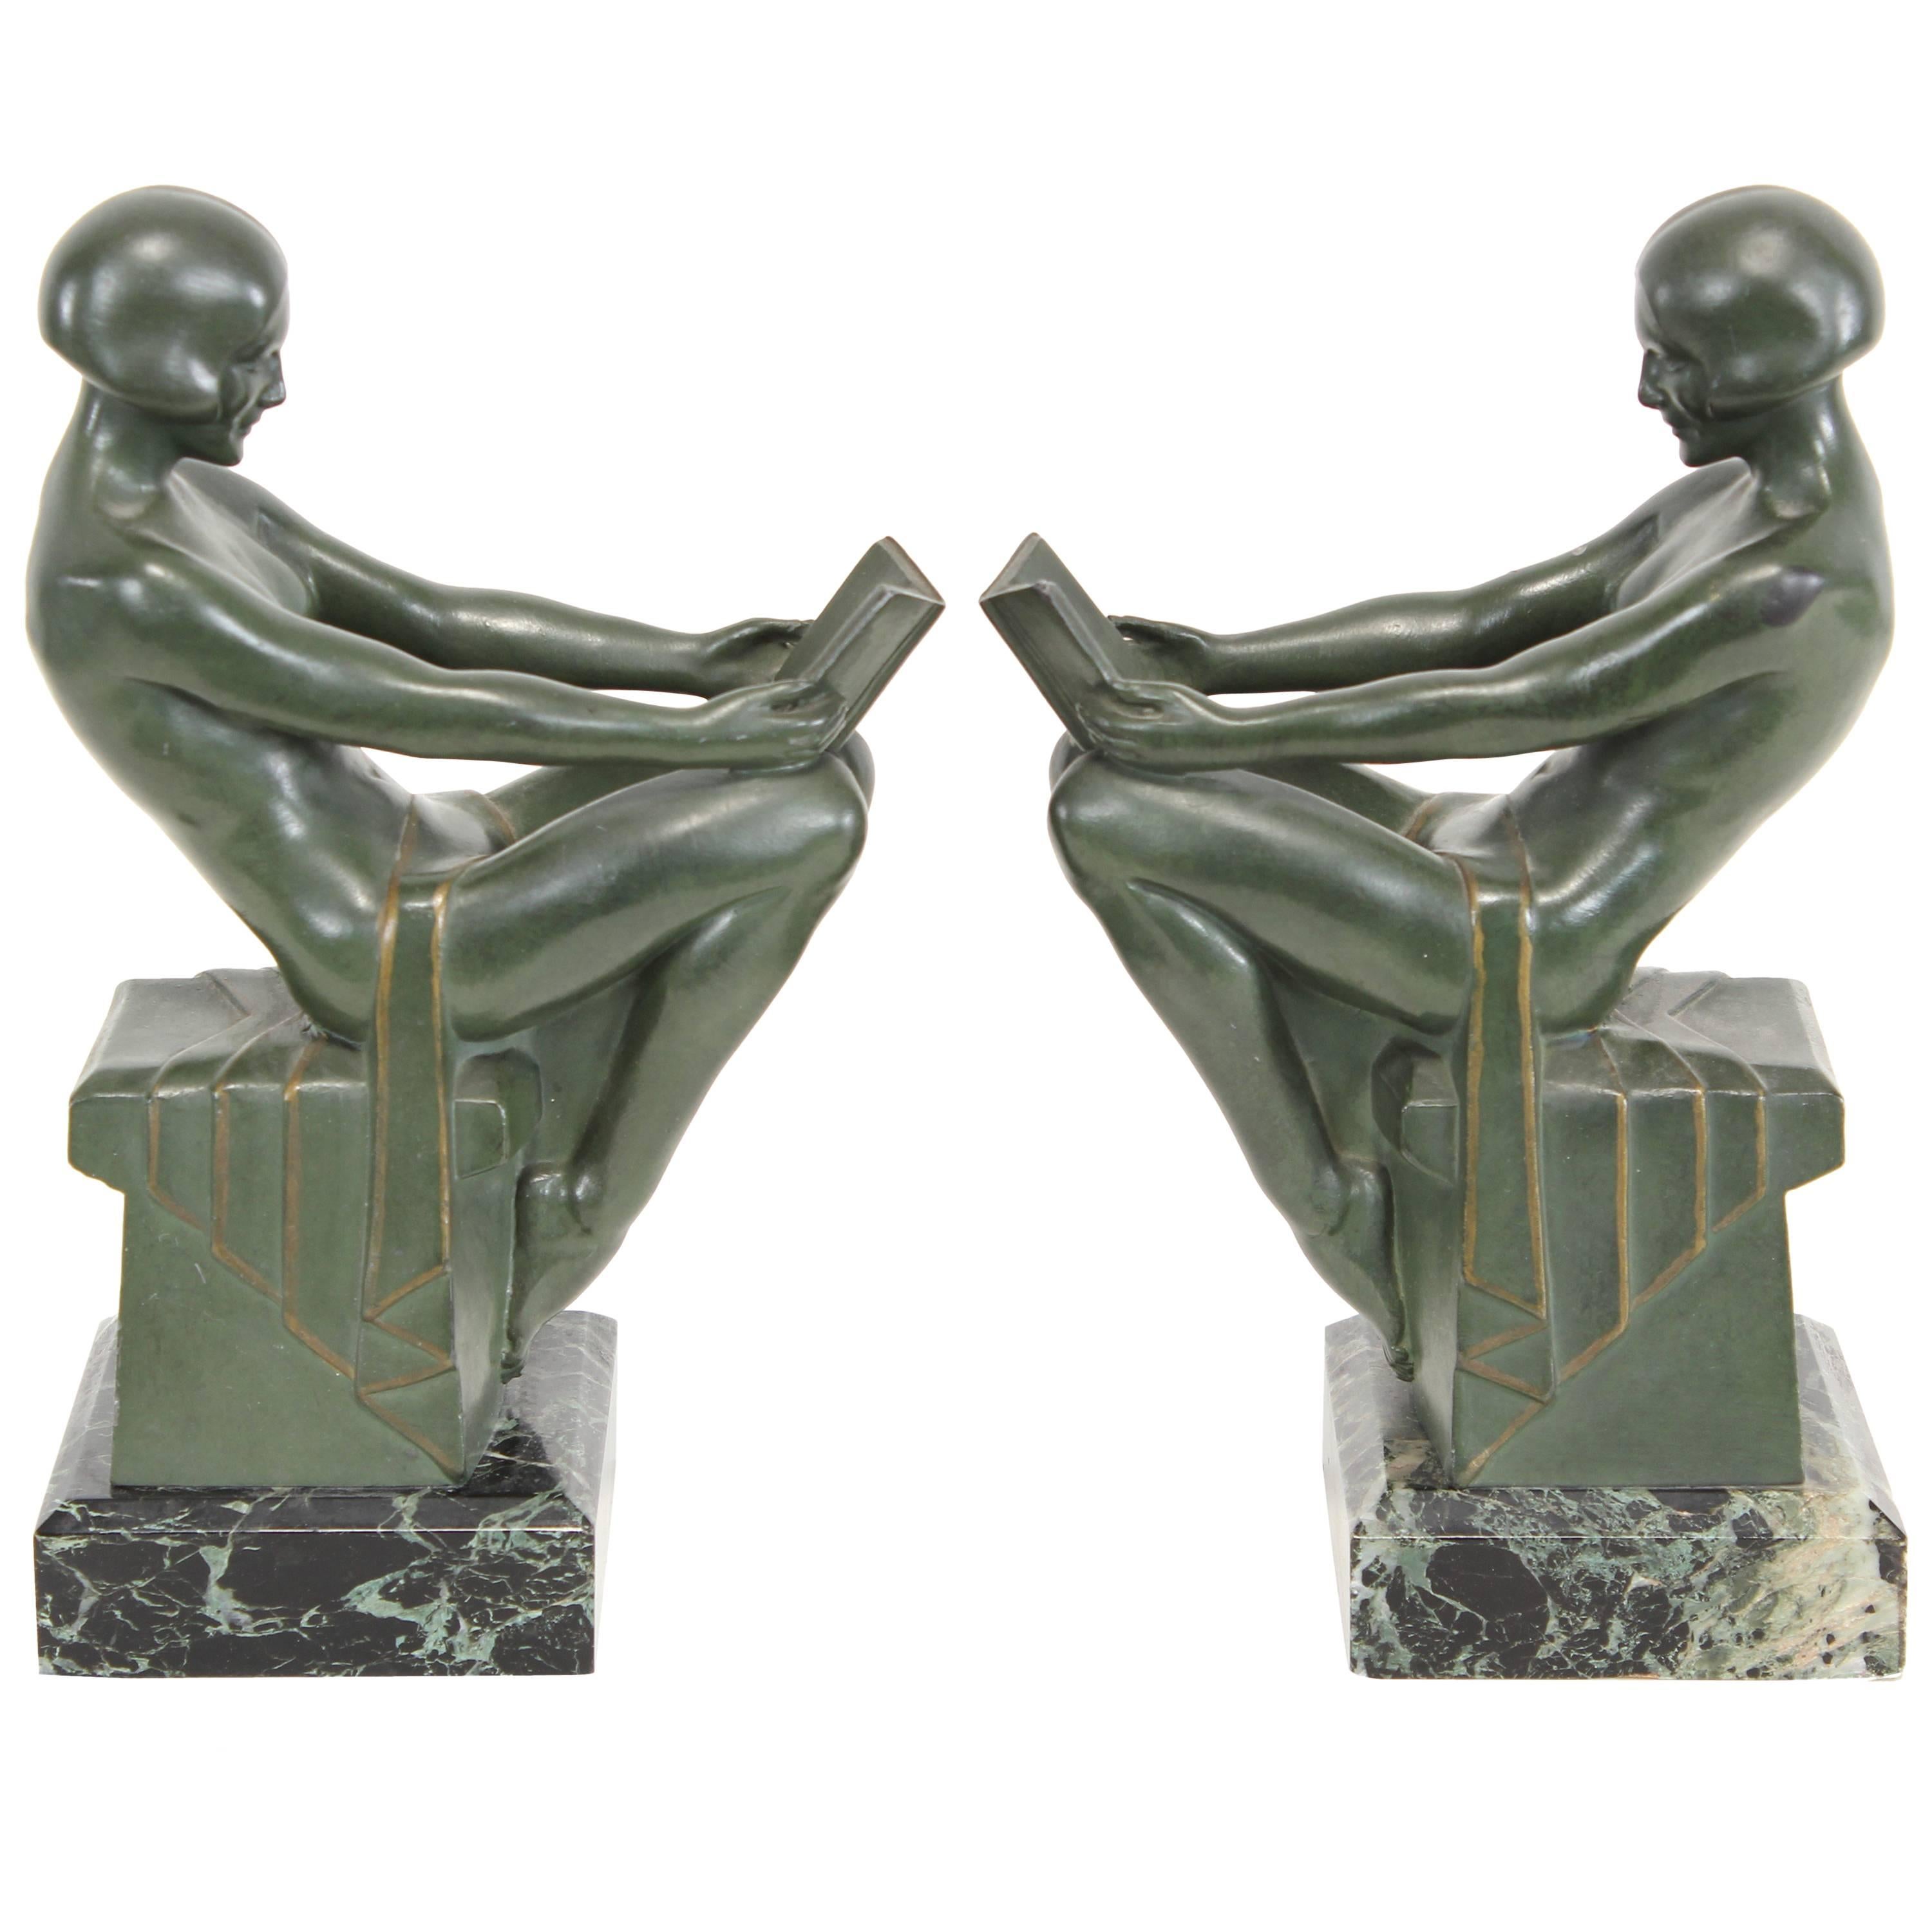 Signed French Art Deco Nude Bookends by Max Le Verrier, 1930